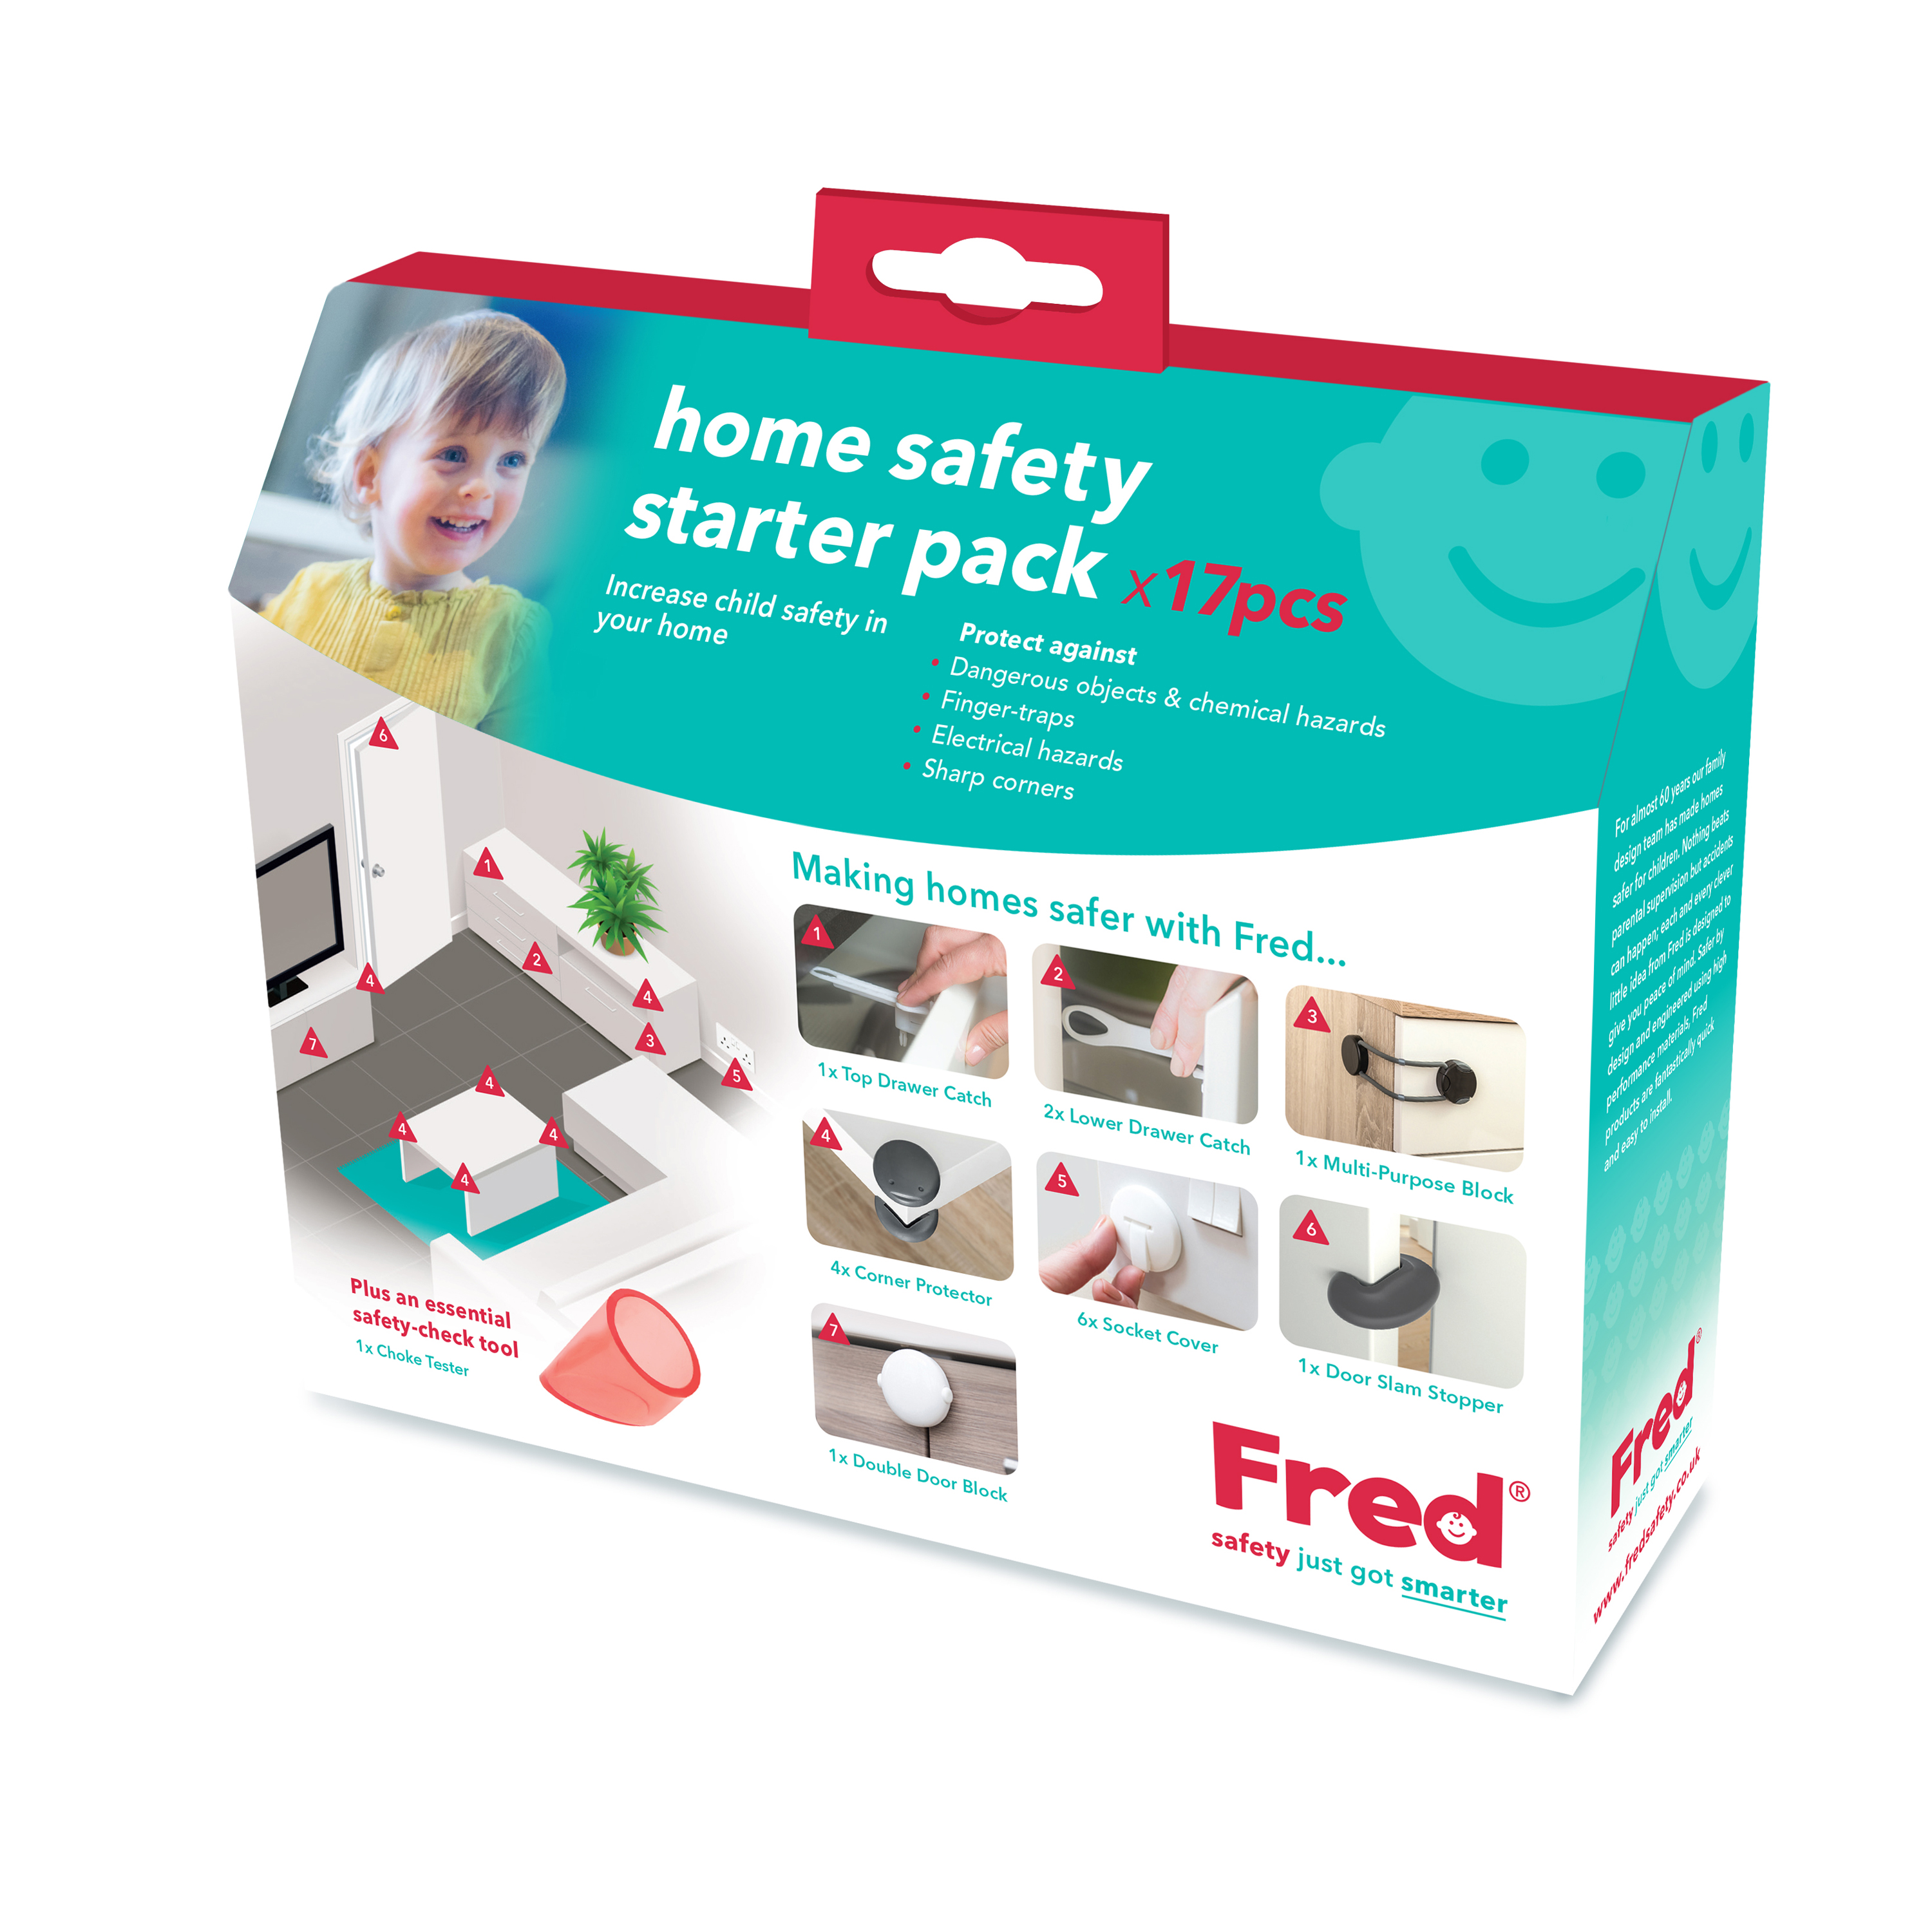 Fred Home Safety Starter Pack, worth £24.99